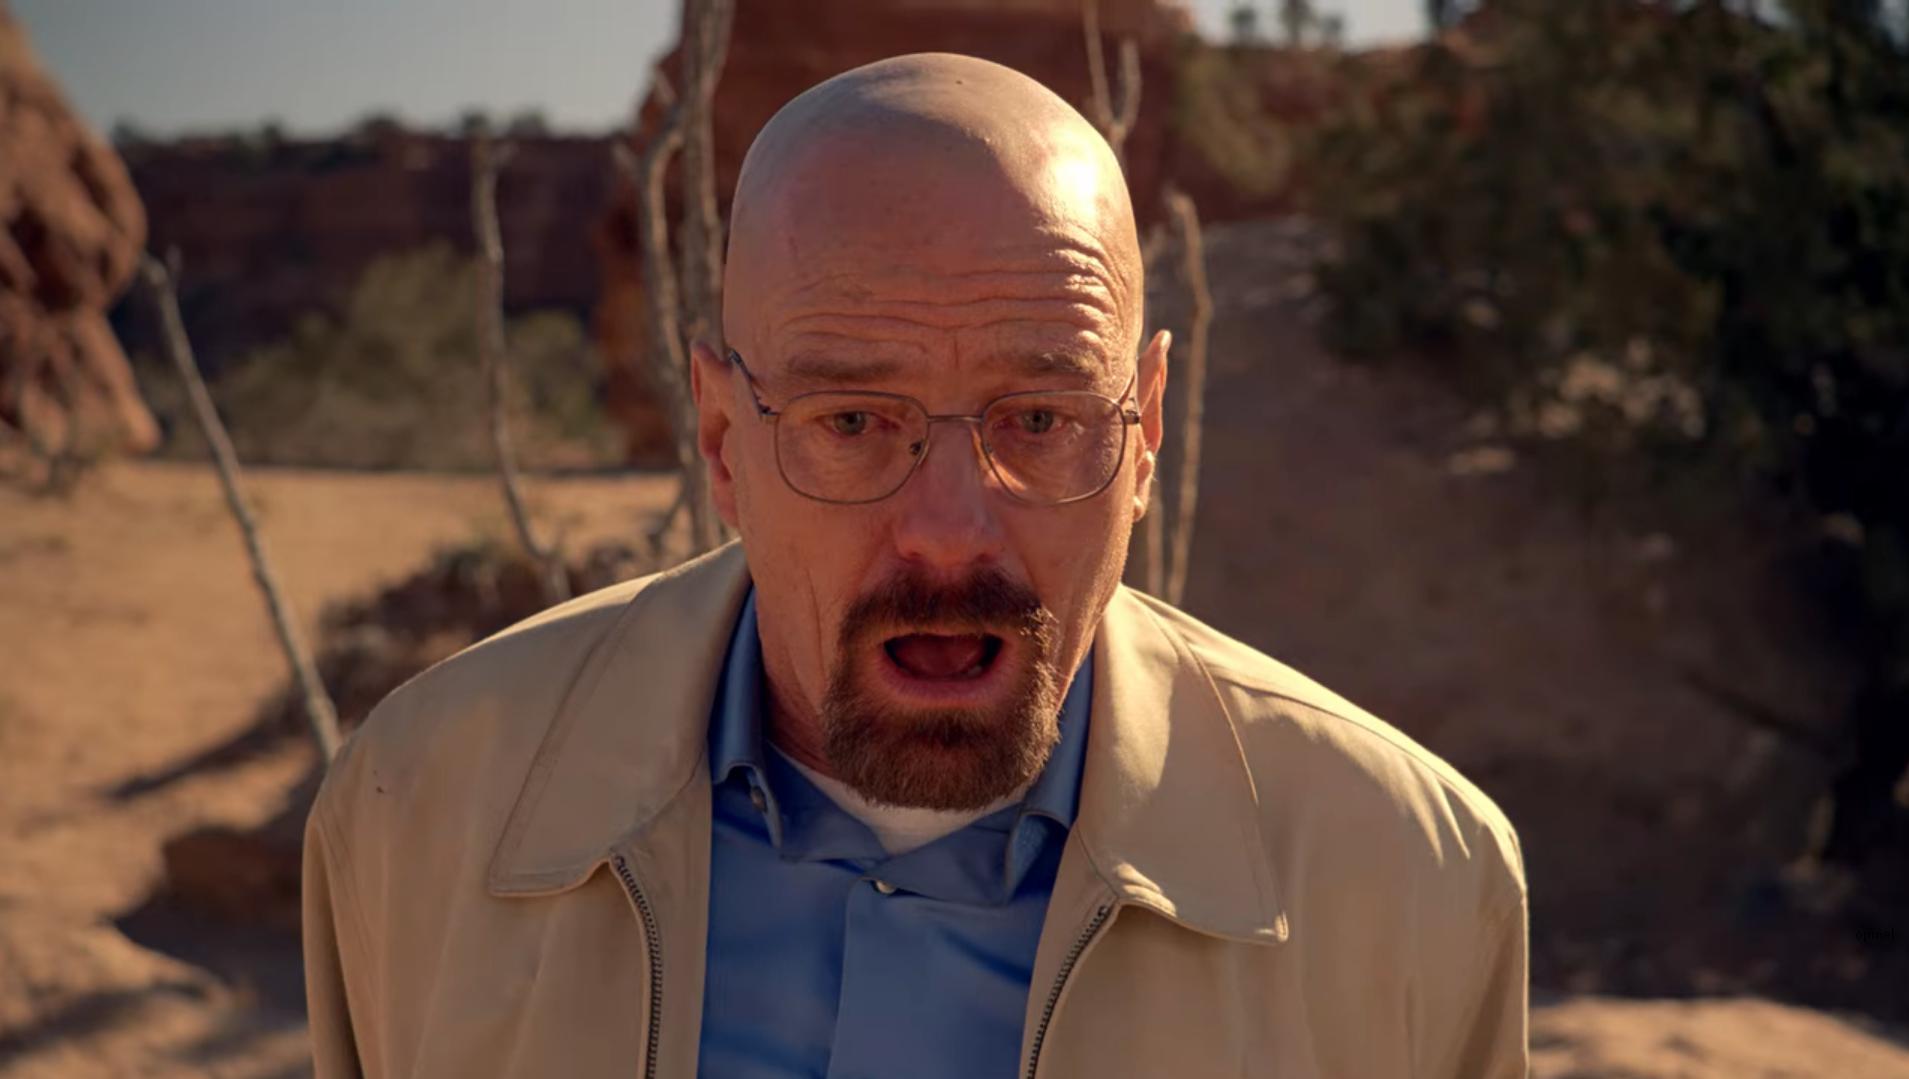 breaking bad facts - Rian Johnson directed both the much-maligned 'The Last Jedi' and the Breaking Bad episode 'Ozymandias' which is widely considered one of the best episodes in the best series in the history of television.-u/kdryan1